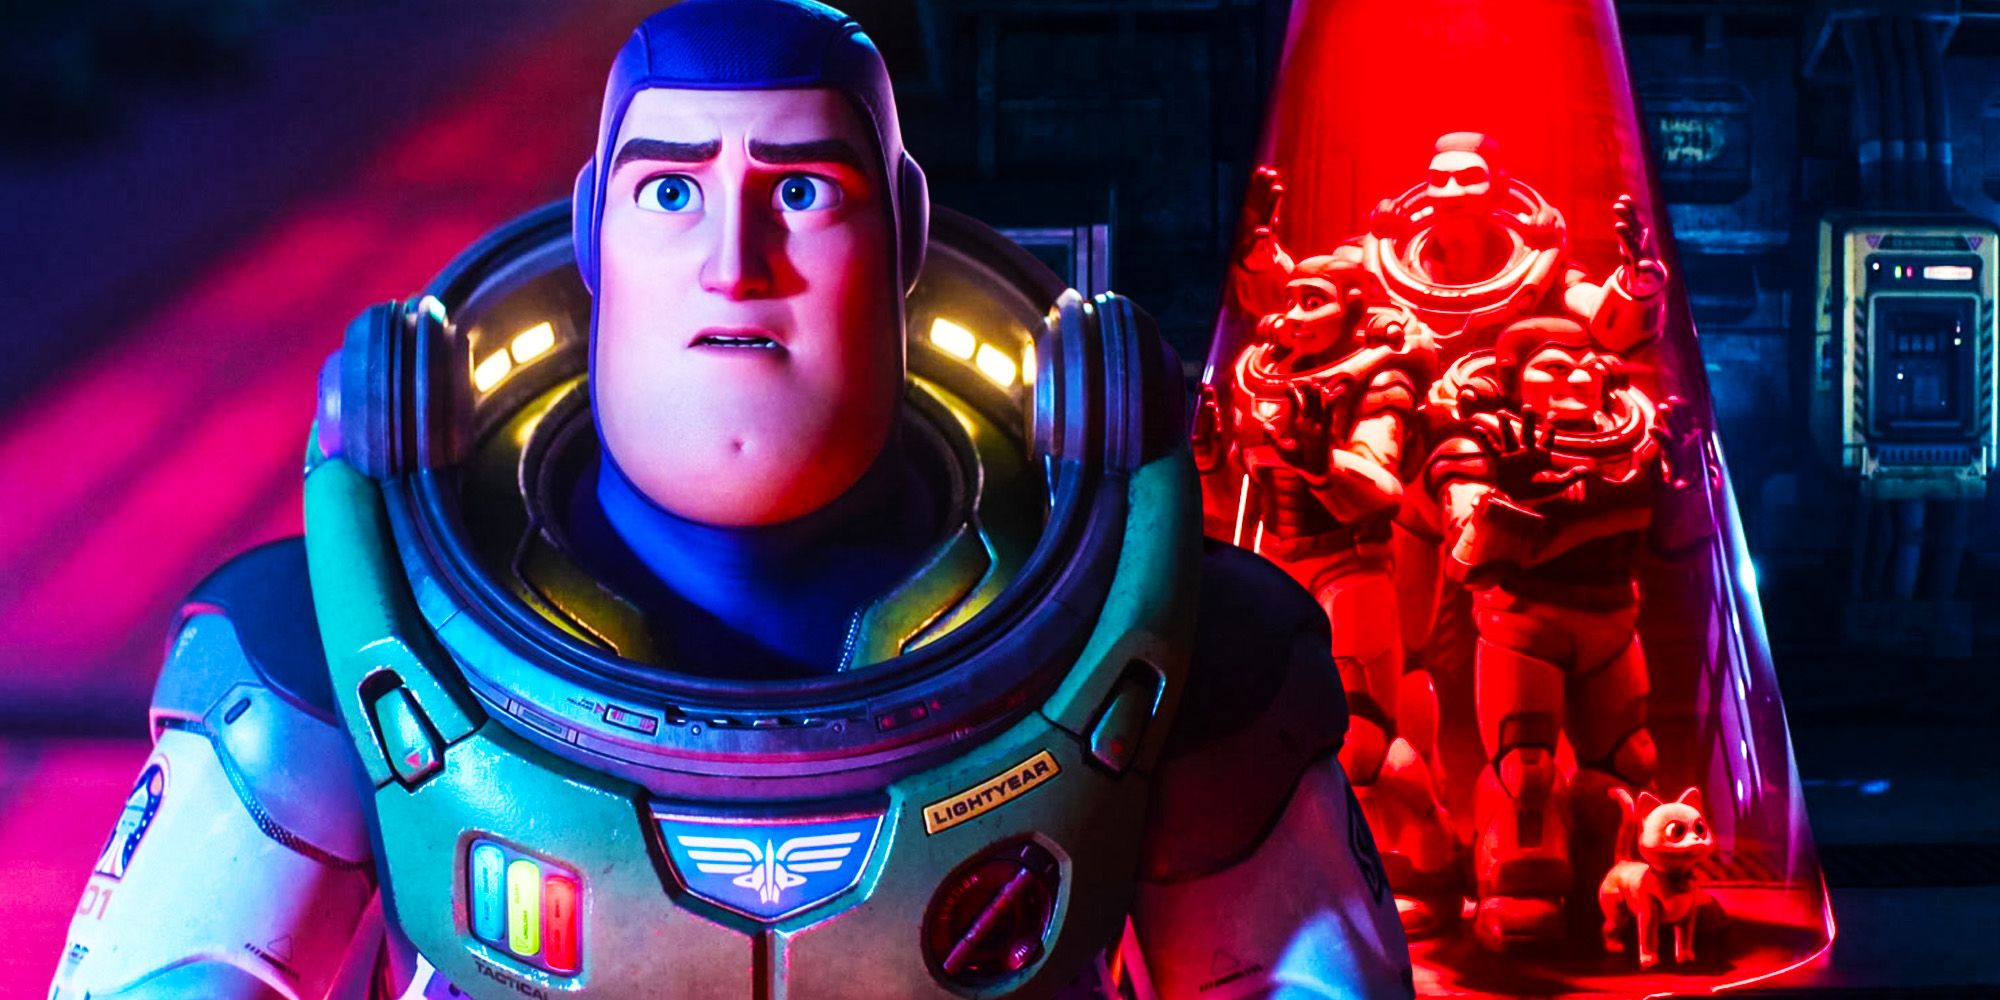 Buzz Lightyear and the rookie Crew in Lightyear.